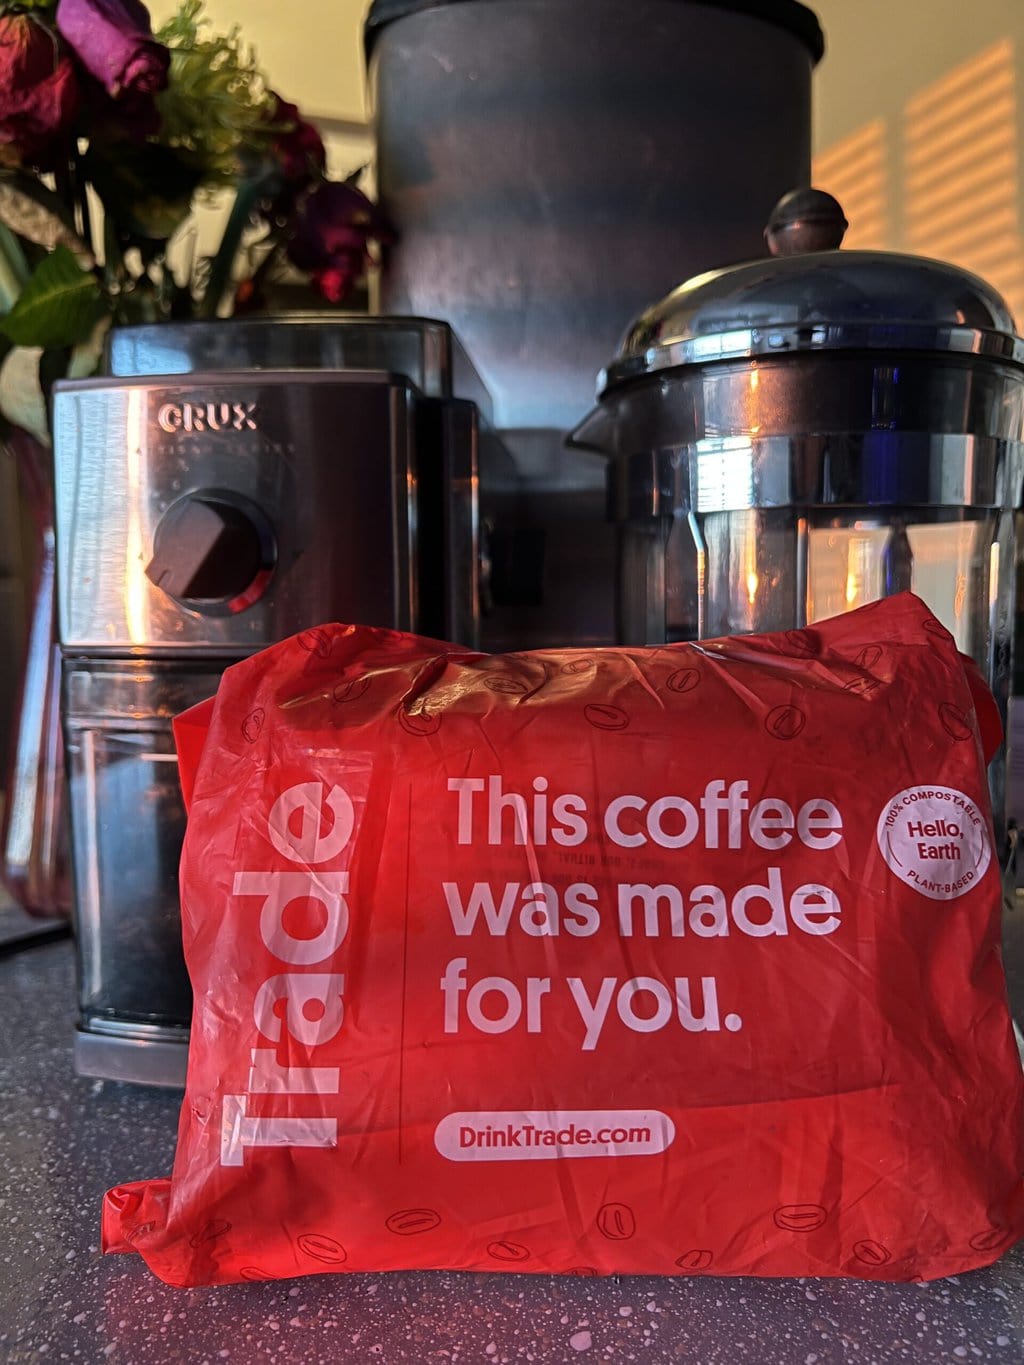 packaging of coffee in a red bag from Trade stands against the background of a coffee grinder and a French press